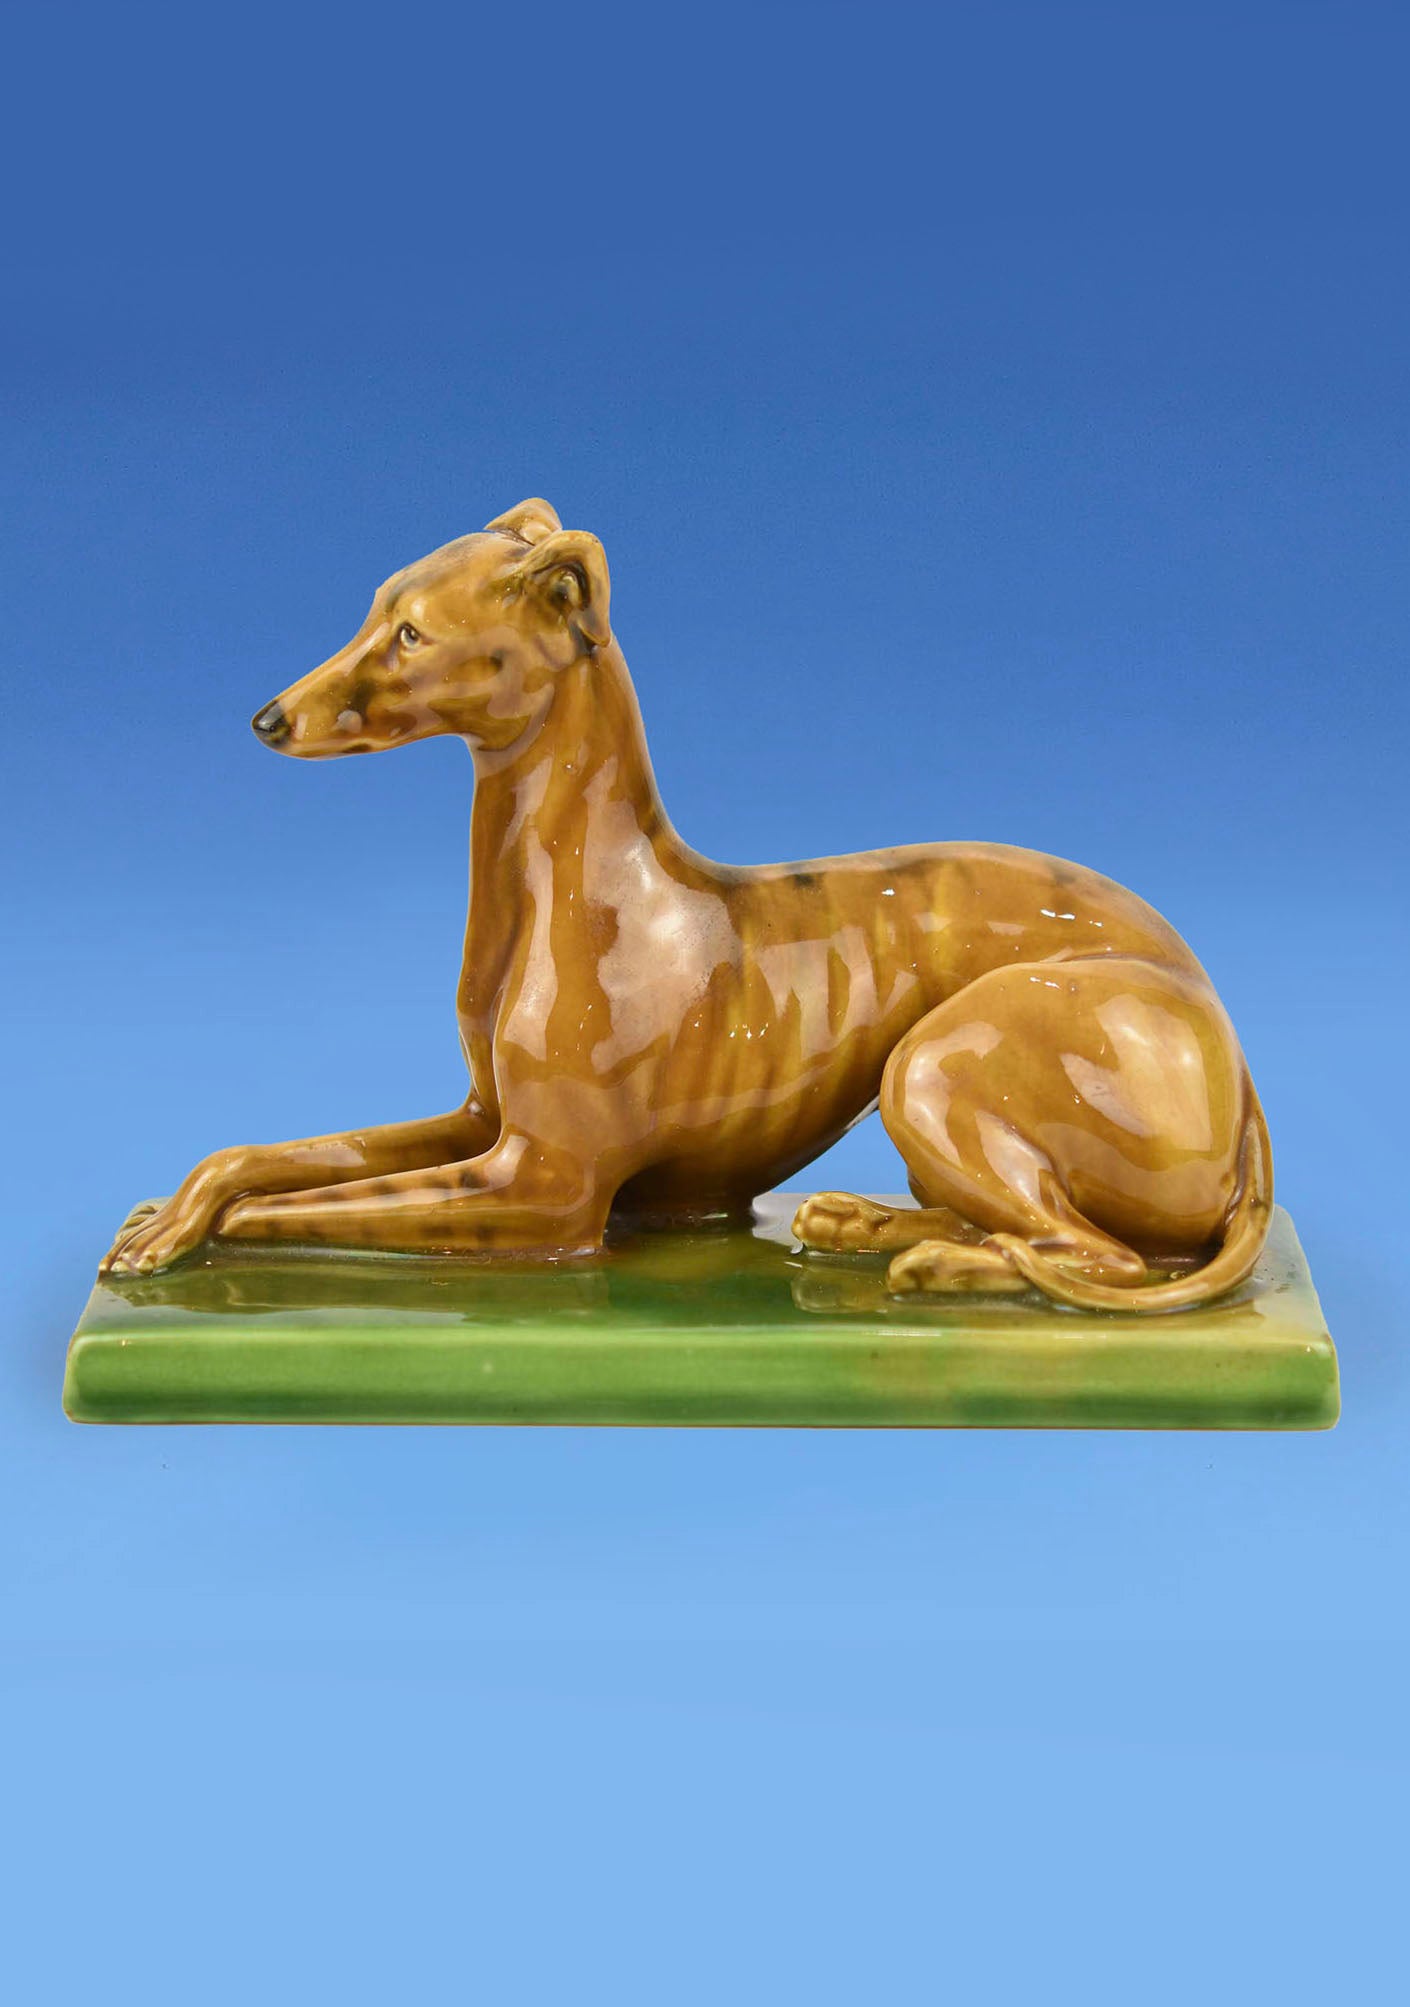 Minton Majolica Paperweight c.1890 in the form of a Recumbent Greyhound sculpted by Paul Comolera